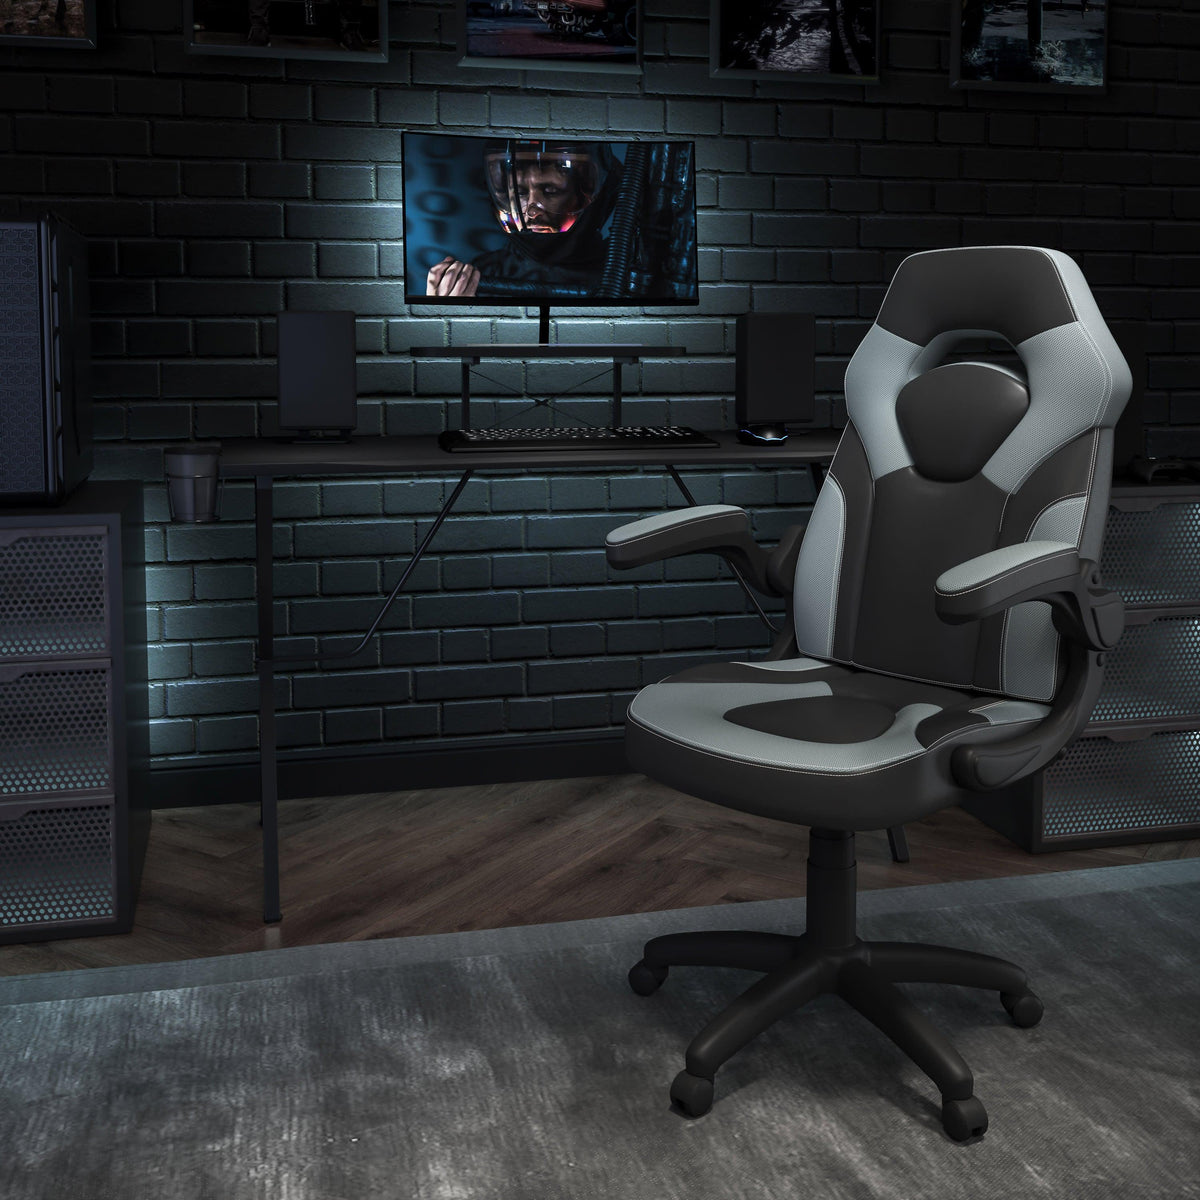 Gray |#| Black/Gray Gaming Desk Set with Cup Holder, Headphone Hook, and Monitor Stand